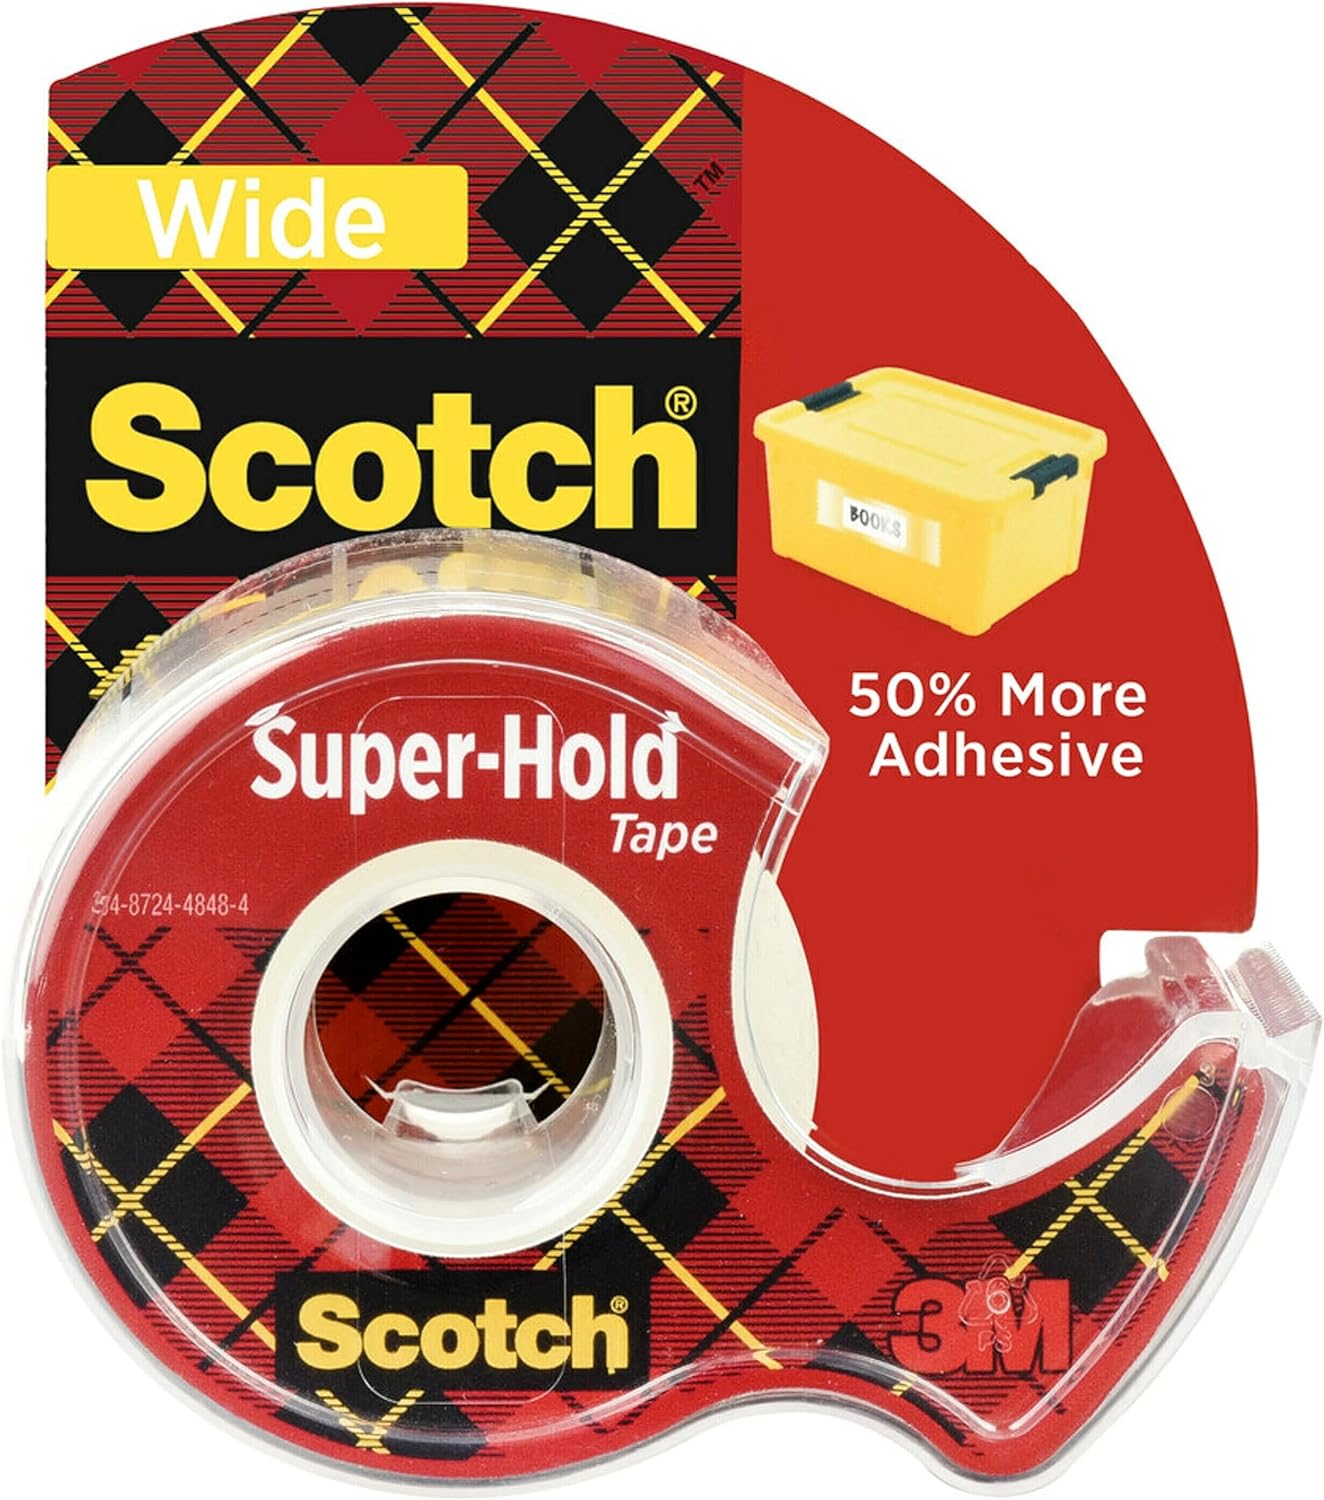 Scotch Super-Hold Wide Invisible Tape (1.5" x 18 yds.) $2.65 + Free Shipping